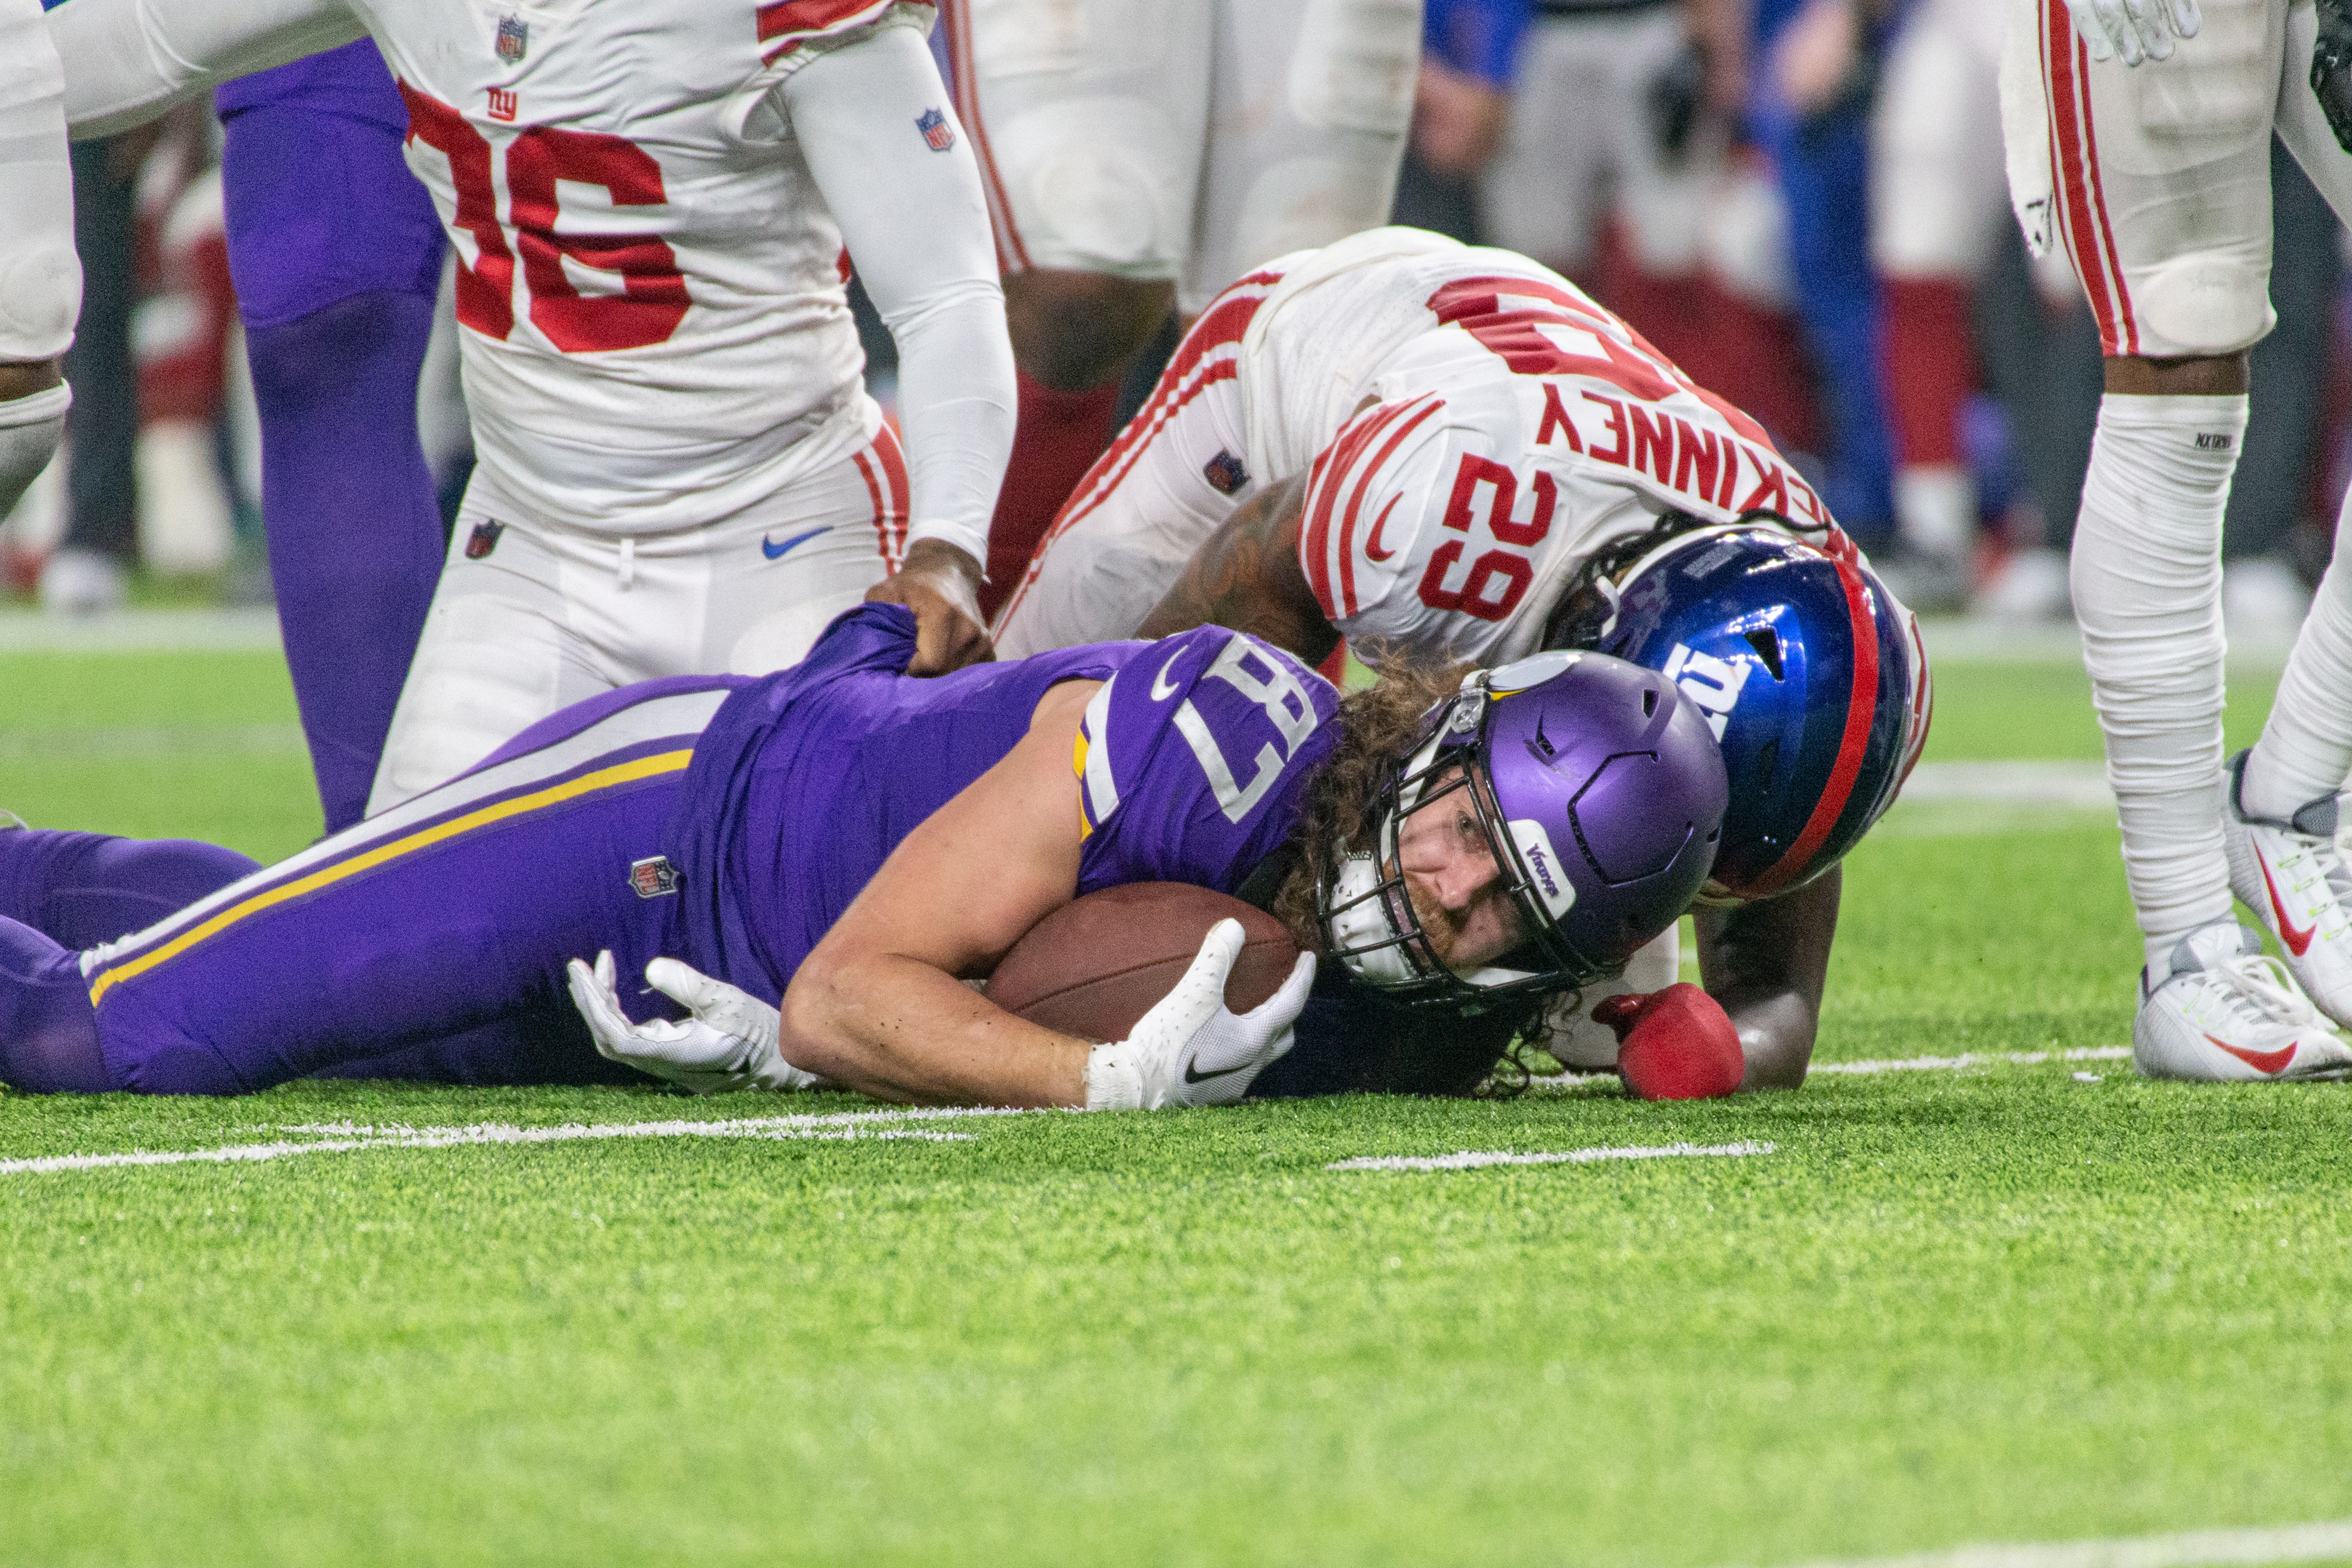 Giants bring Vikings' season to a close with 31-24 win in 1st